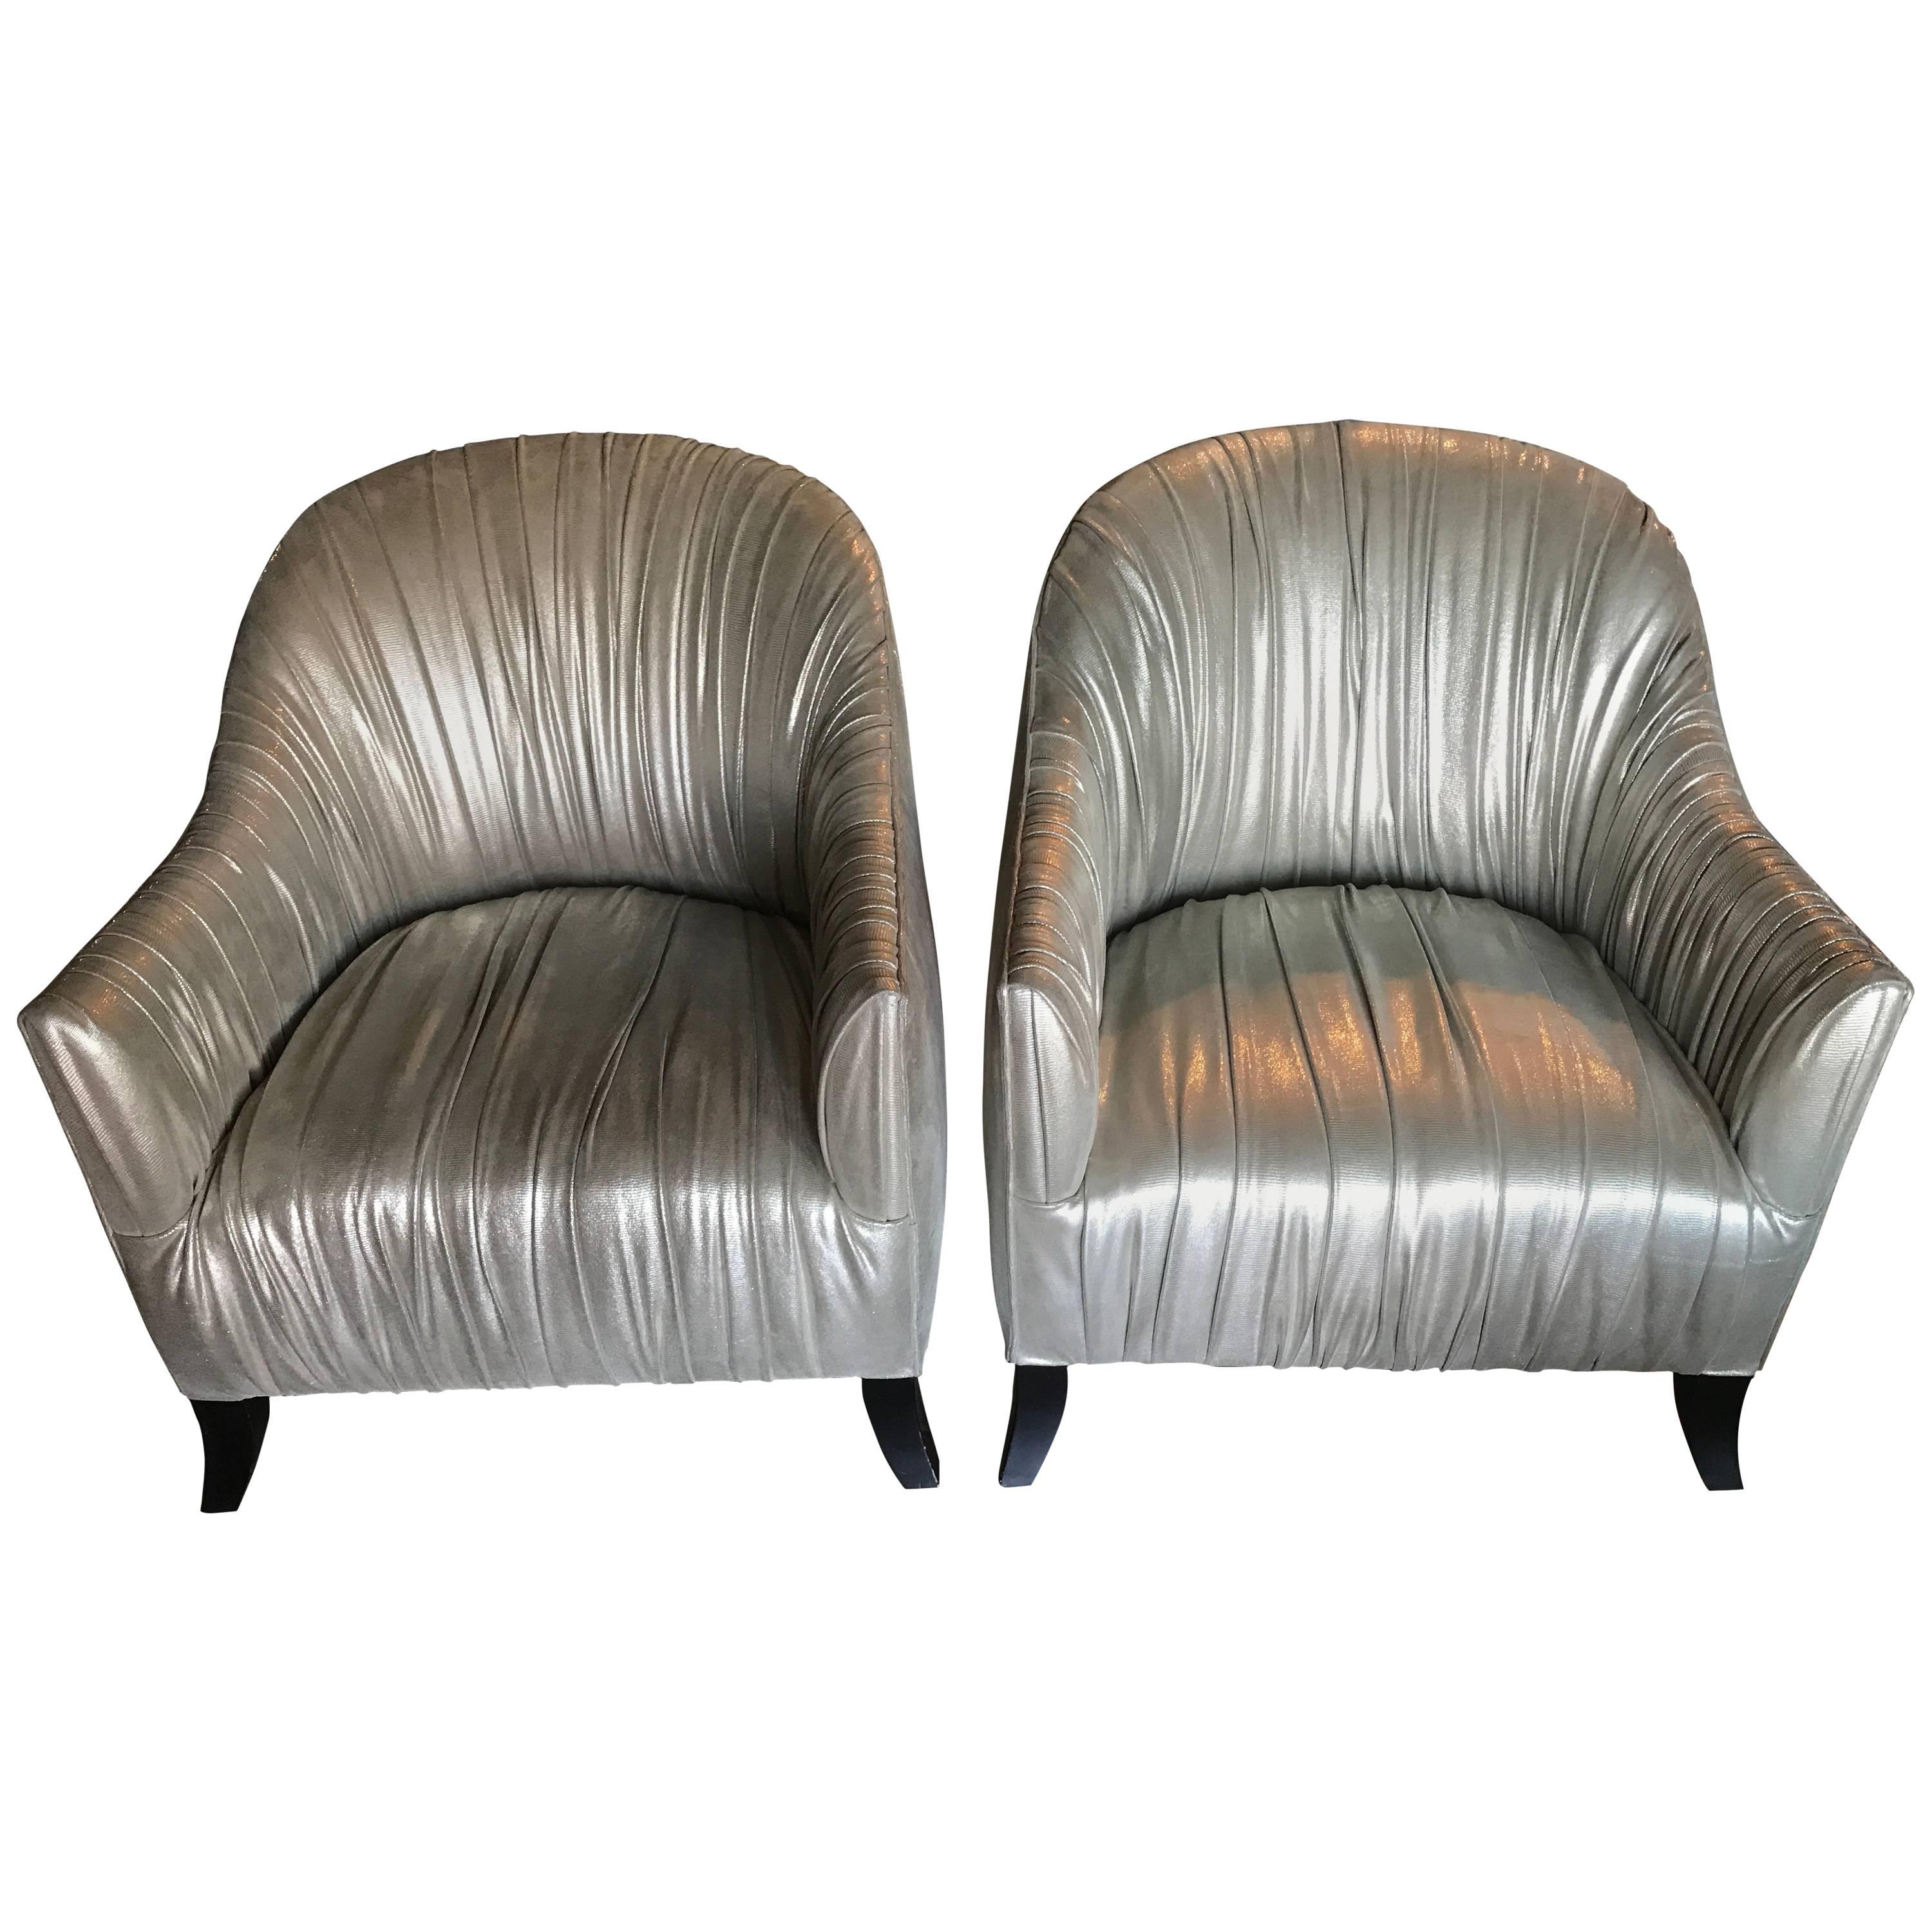  Pair of Hollywood Regency Modern Ruched Silver Metallic Leather Club Chairs